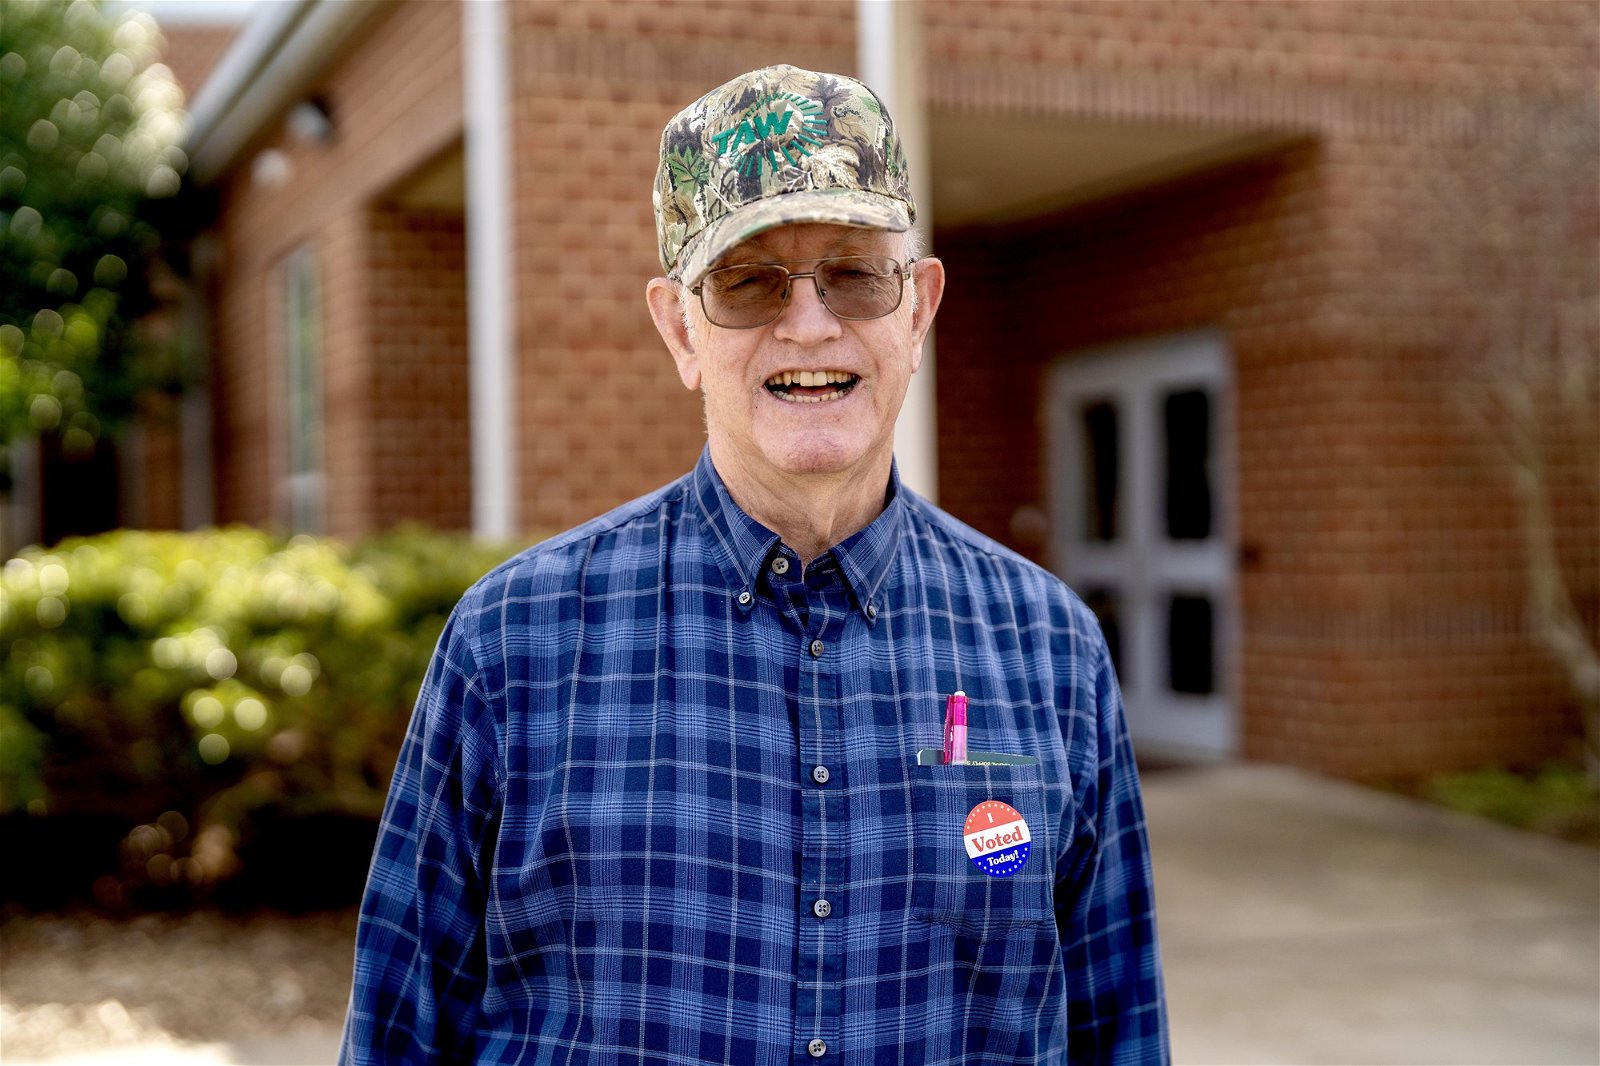 Charles Jones stands outside a brick building, wearing a cap and an 'I voted today' sticker on a blue checked shirt.